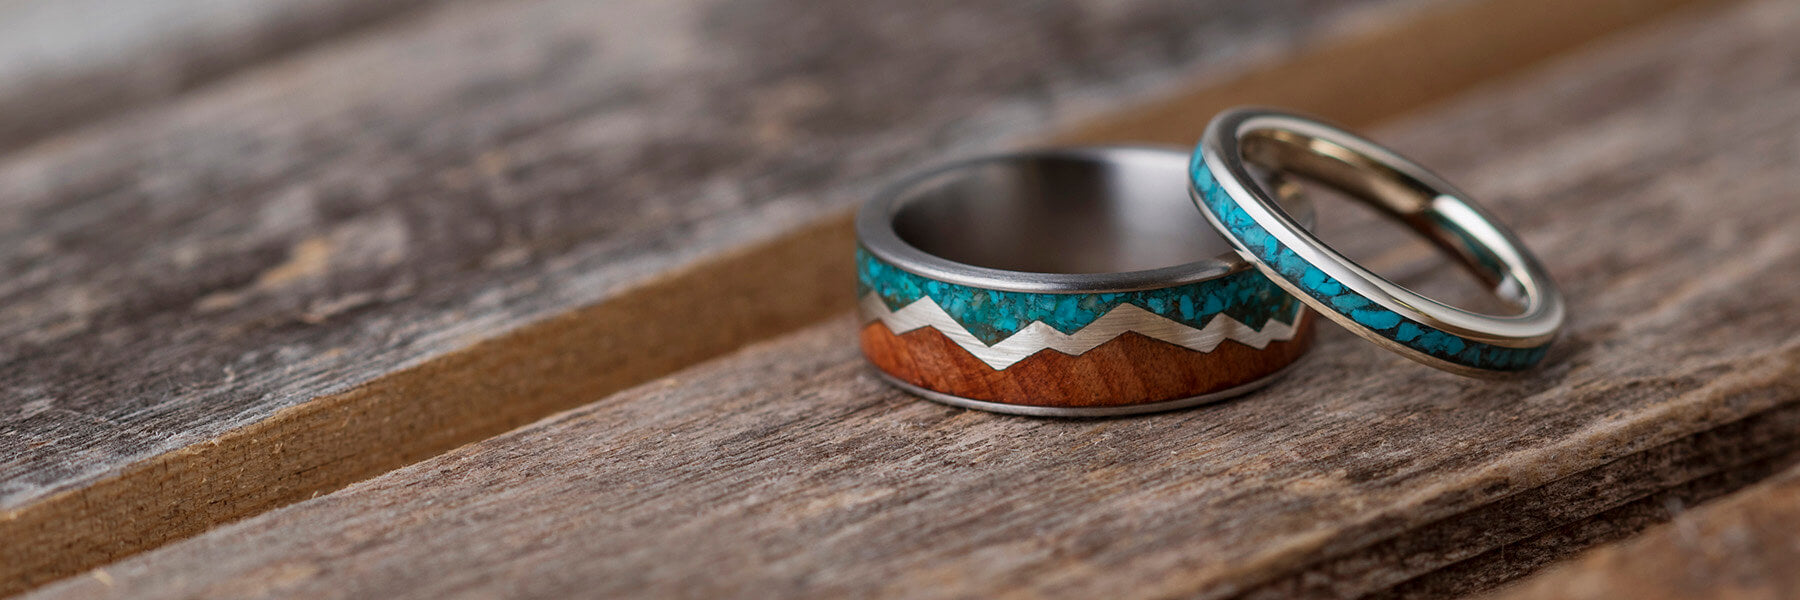 Turquoise Wedding Bands from Jewelry by Johan